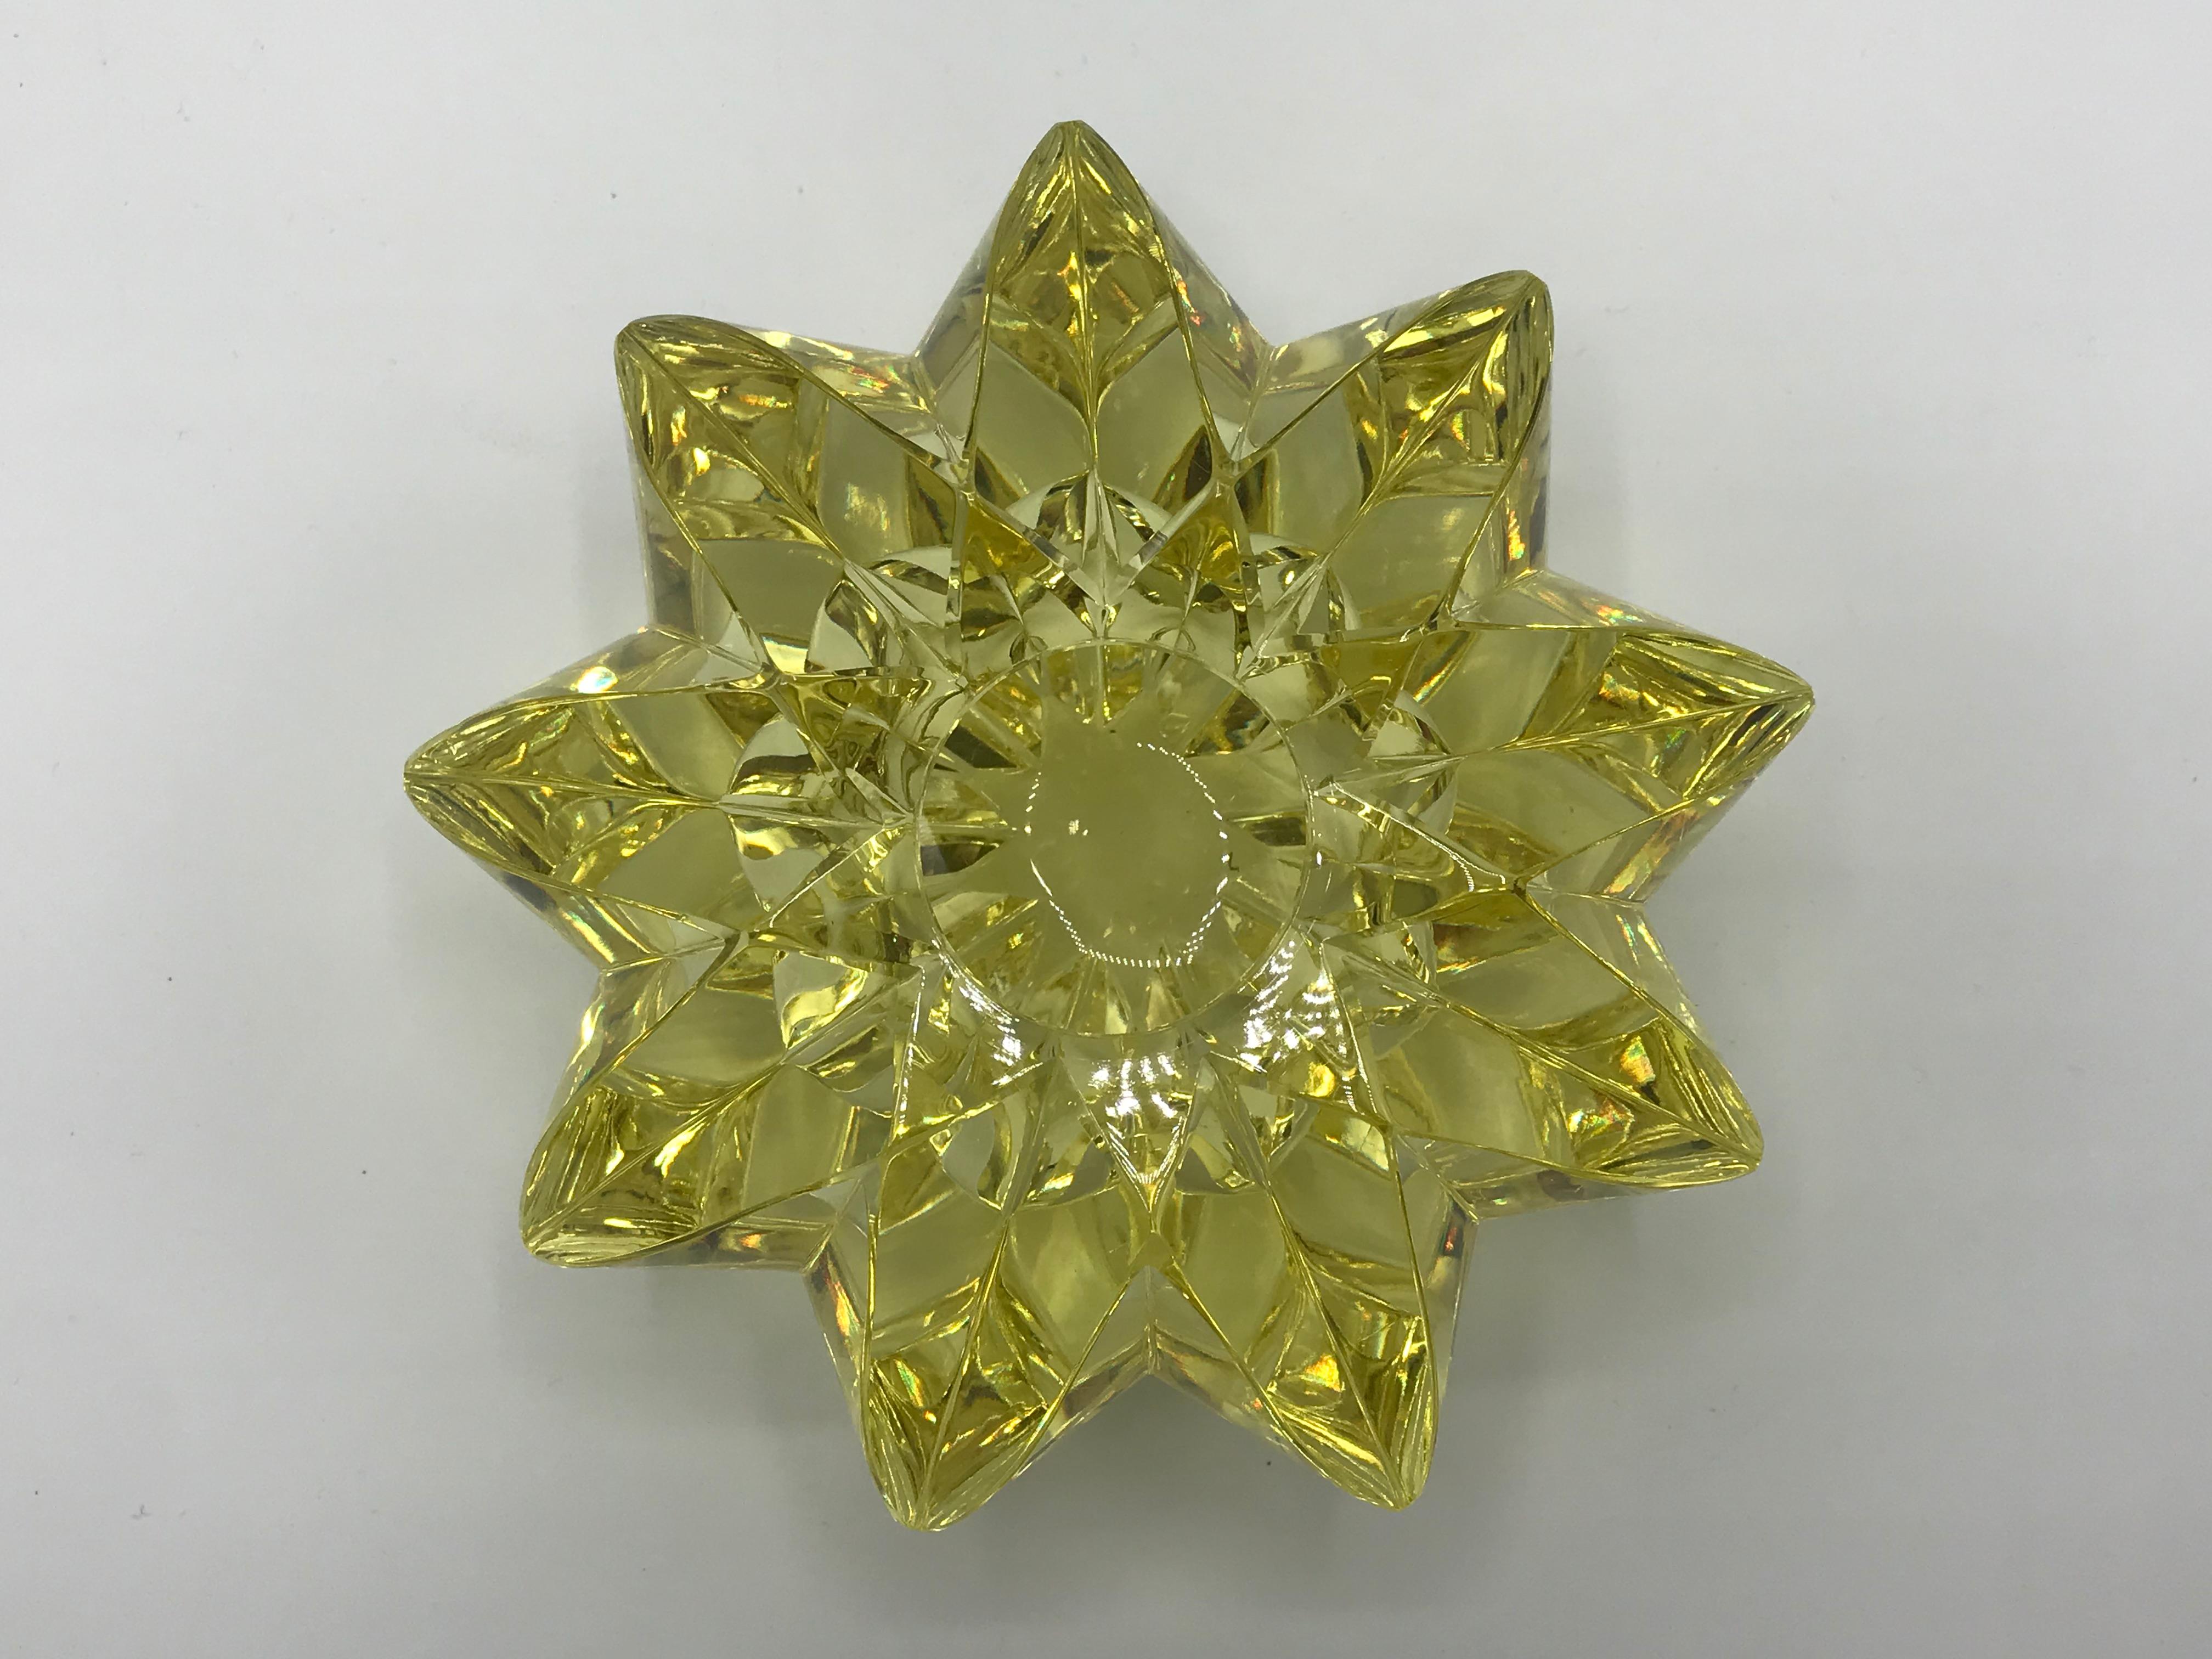 Offered is a stunning, 1960s Italian yellow Murano glass vase. The piece is shaped in a three-dimensional starburst, with a hallowed center to hold water. Signed on underside, though illegible. Heavy, weighs 4.5lbs.